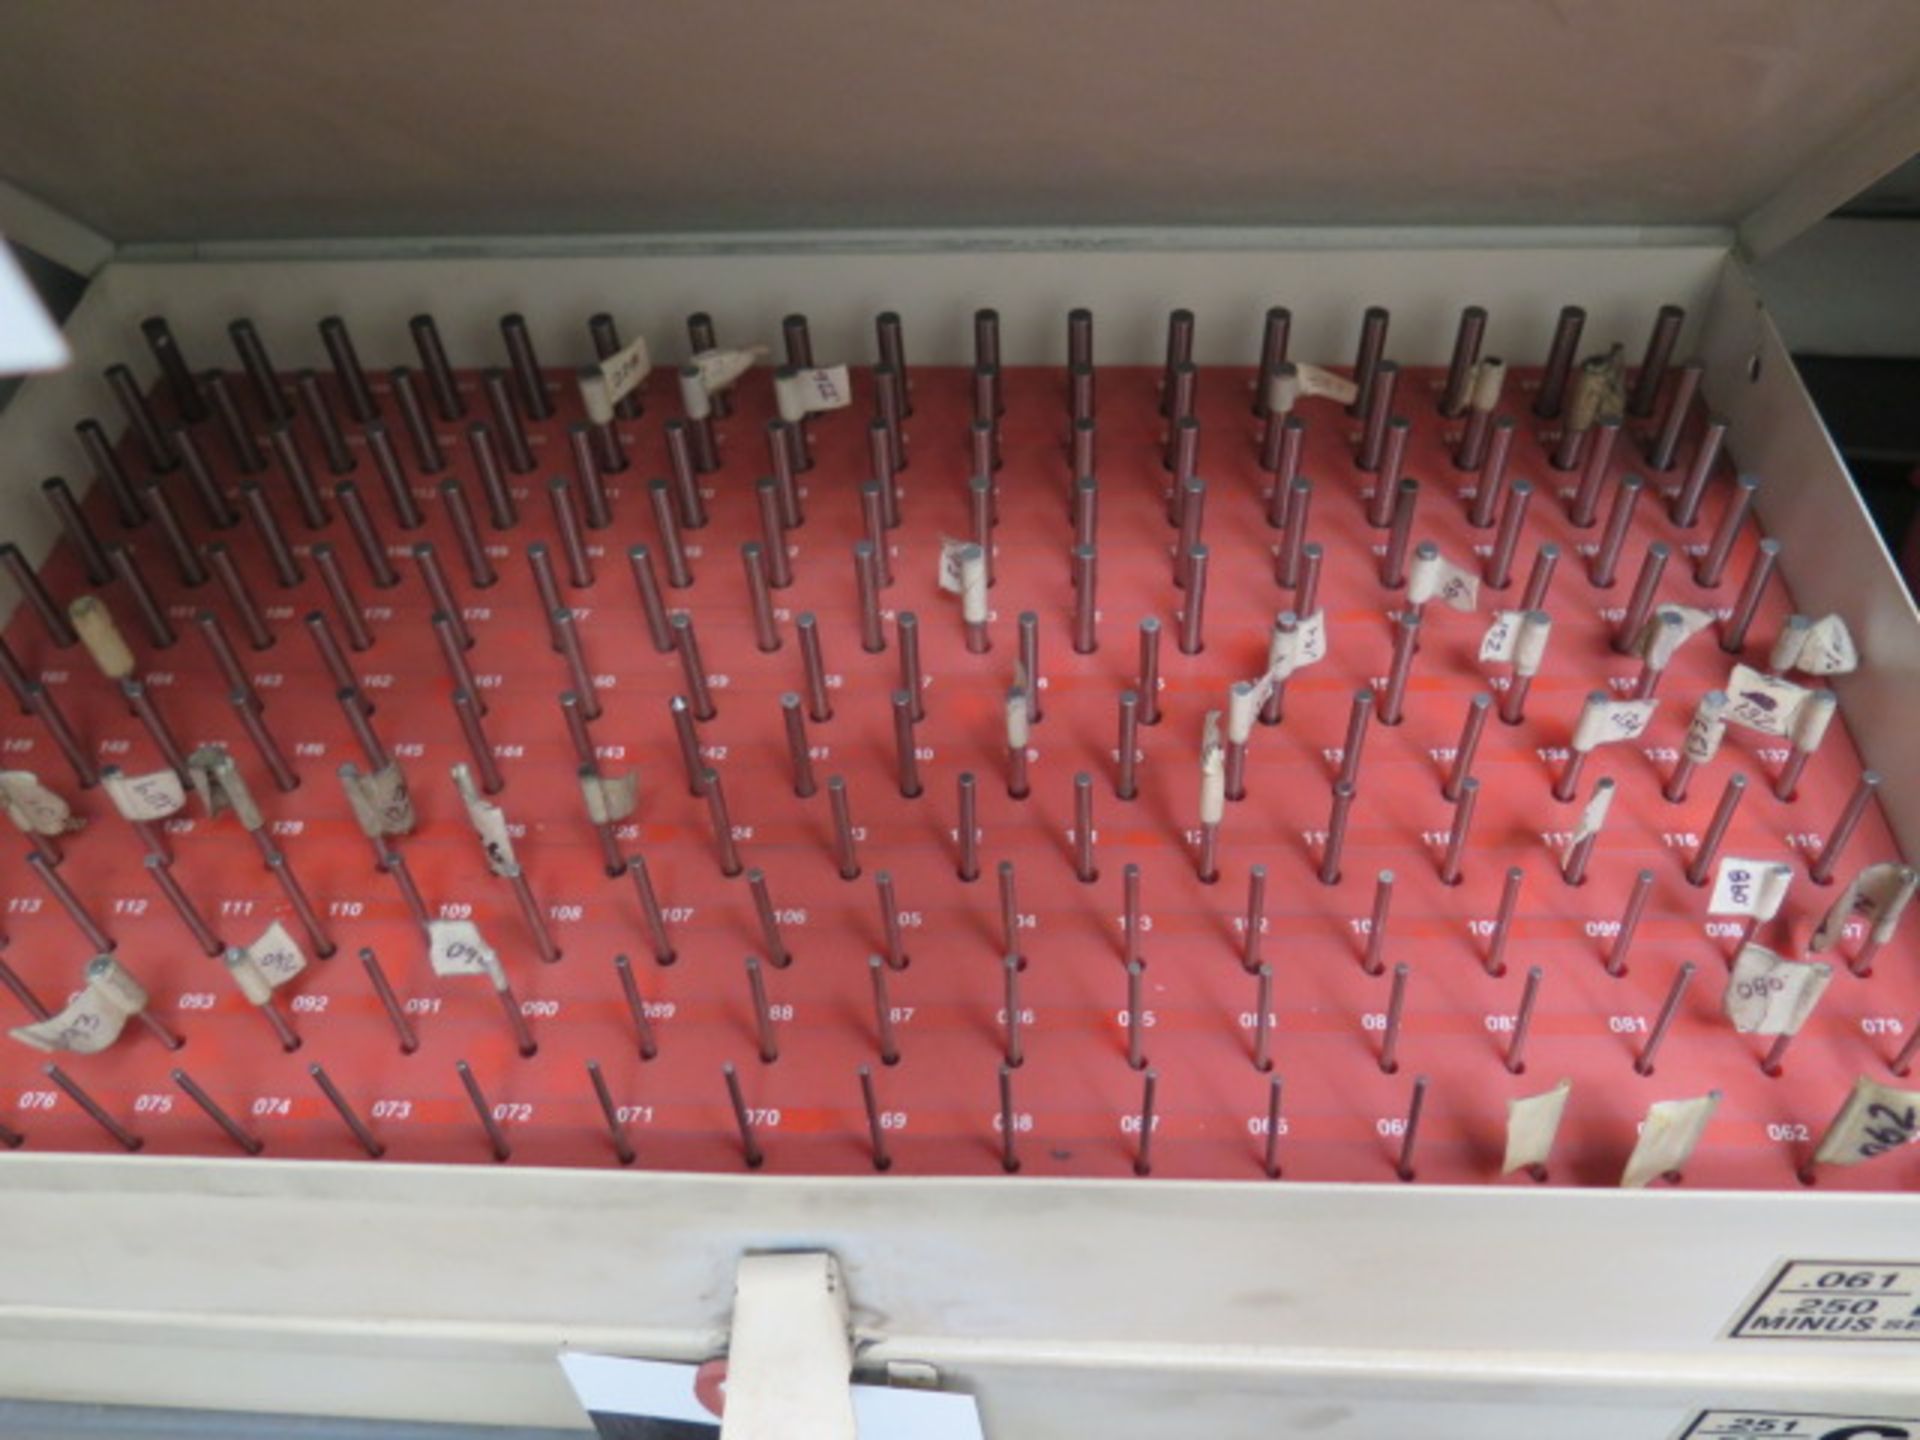 Vermont Pin Gage Sets 0.011"-0.060", 0.061"-.250", .251"-.500" (SOLD AS-IS - NO WARRANTY) - Image 3 of 5